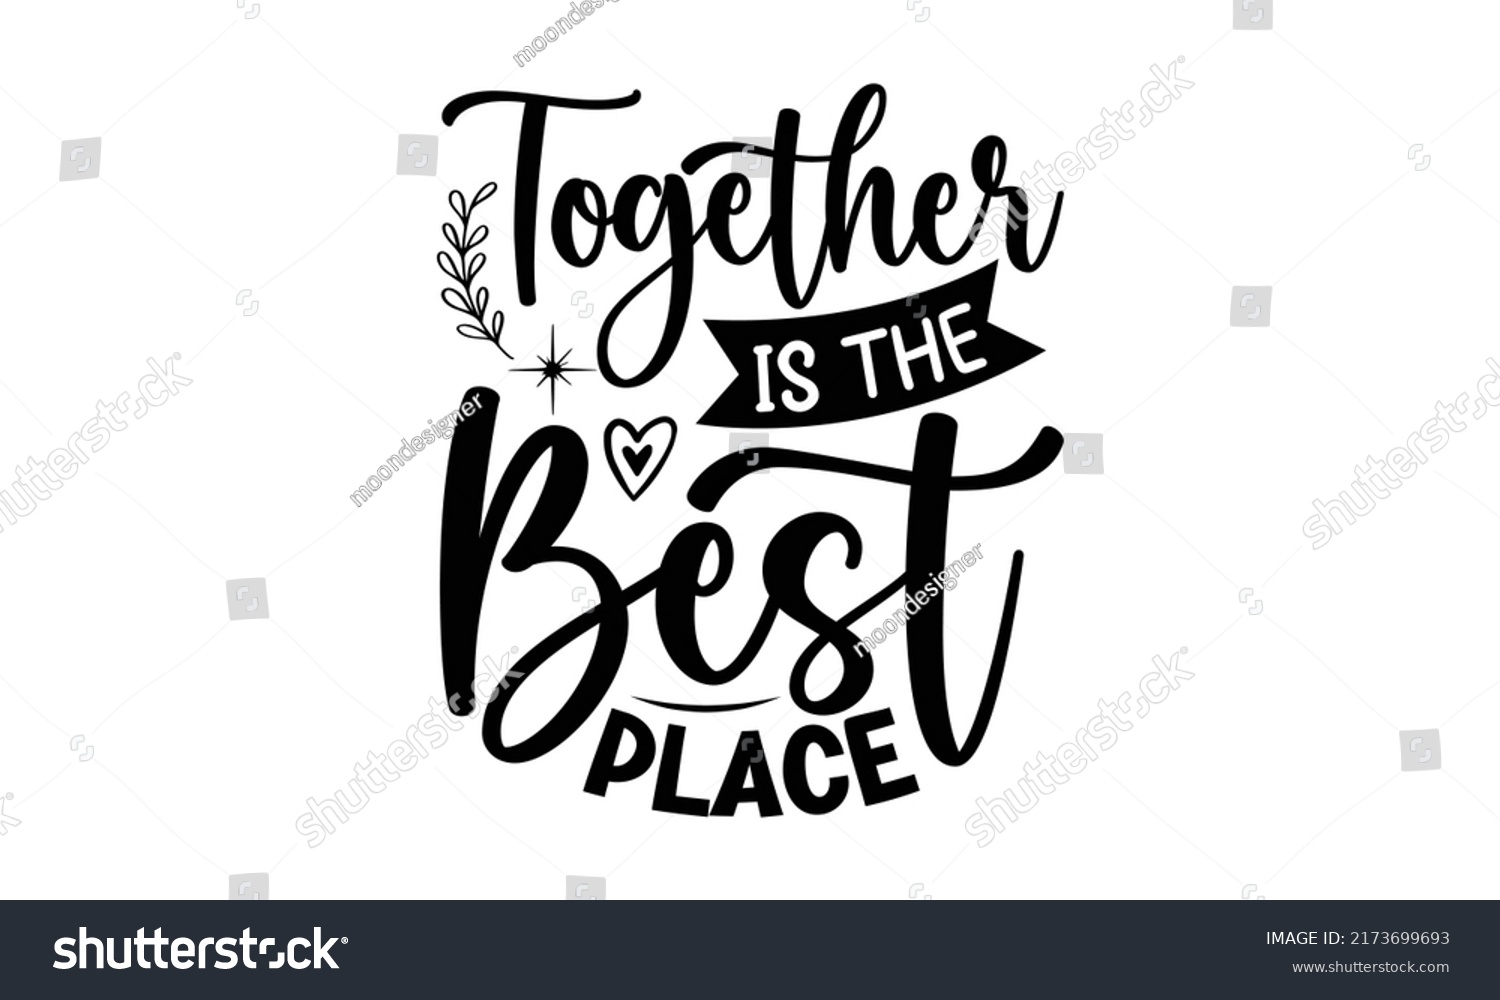 SVG of Together is the best place- family t shirt design, svg, Family Quotes SVG Cut Files Designs, Family quotes SVG cut files, Family quotes t shirt designs, Doormat Lettering Quotes For Printable Poster,  svg